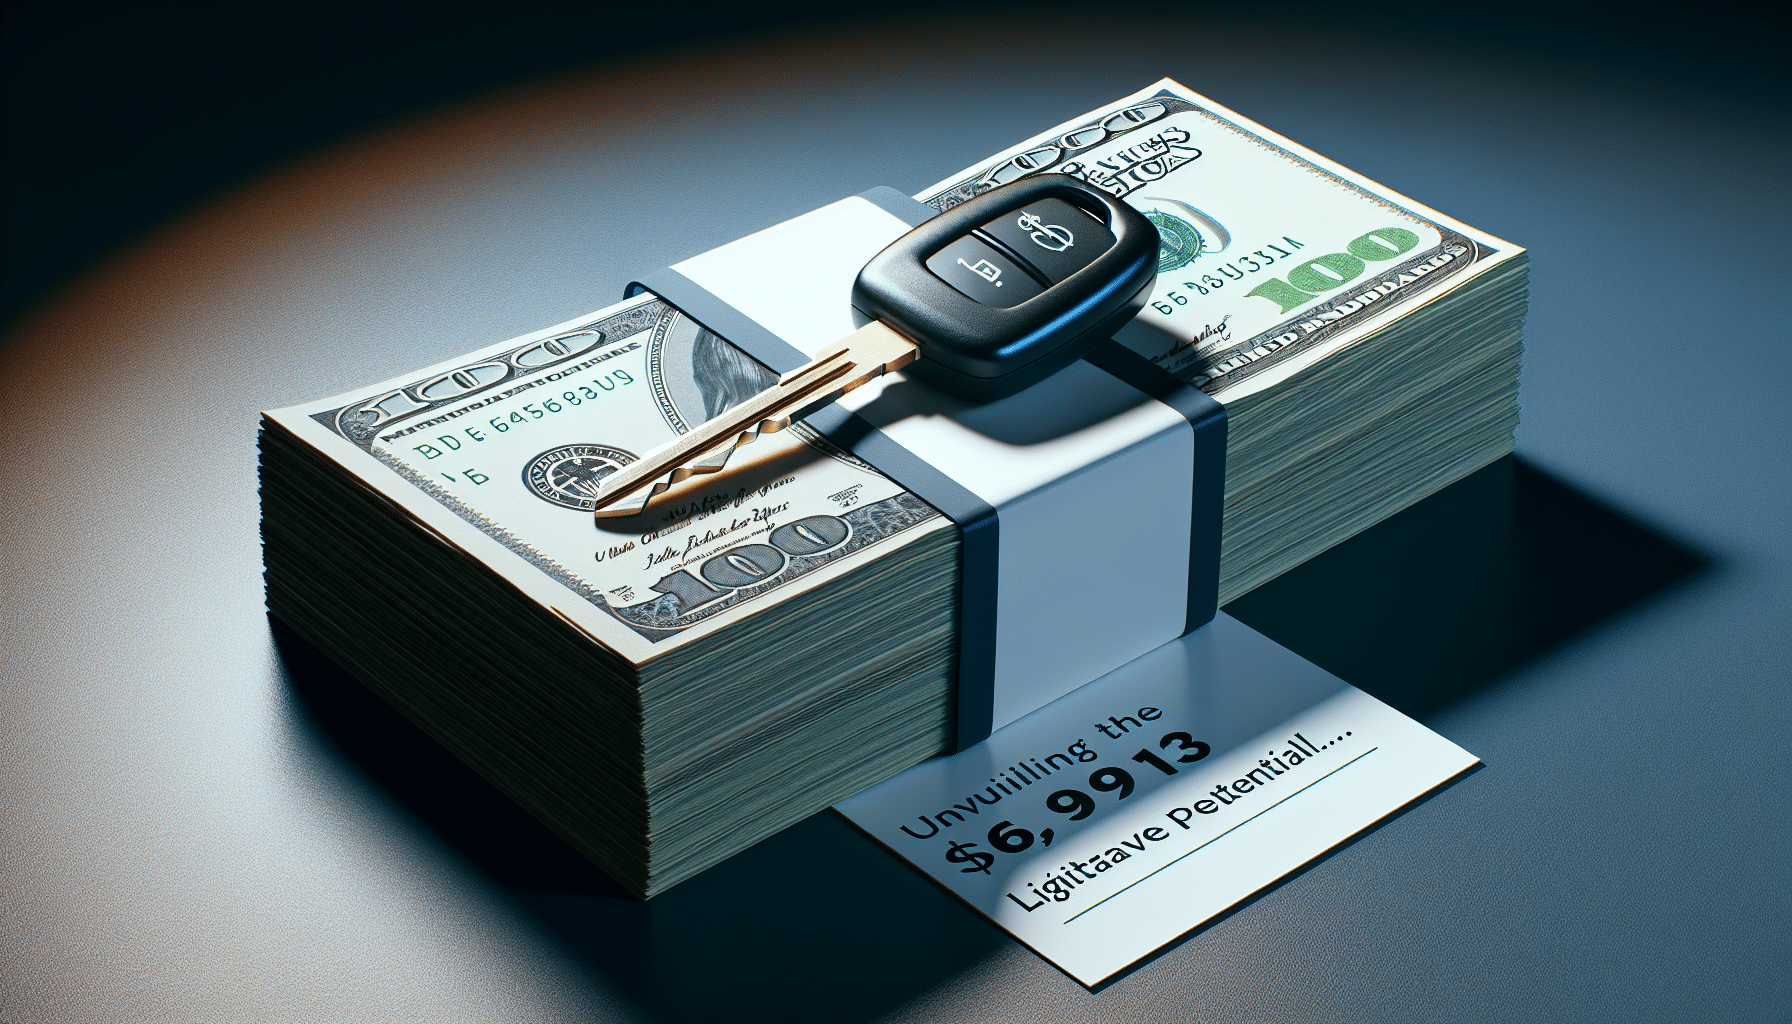 The average salary for Uber drivers in the U.S. is about $63,913 a year